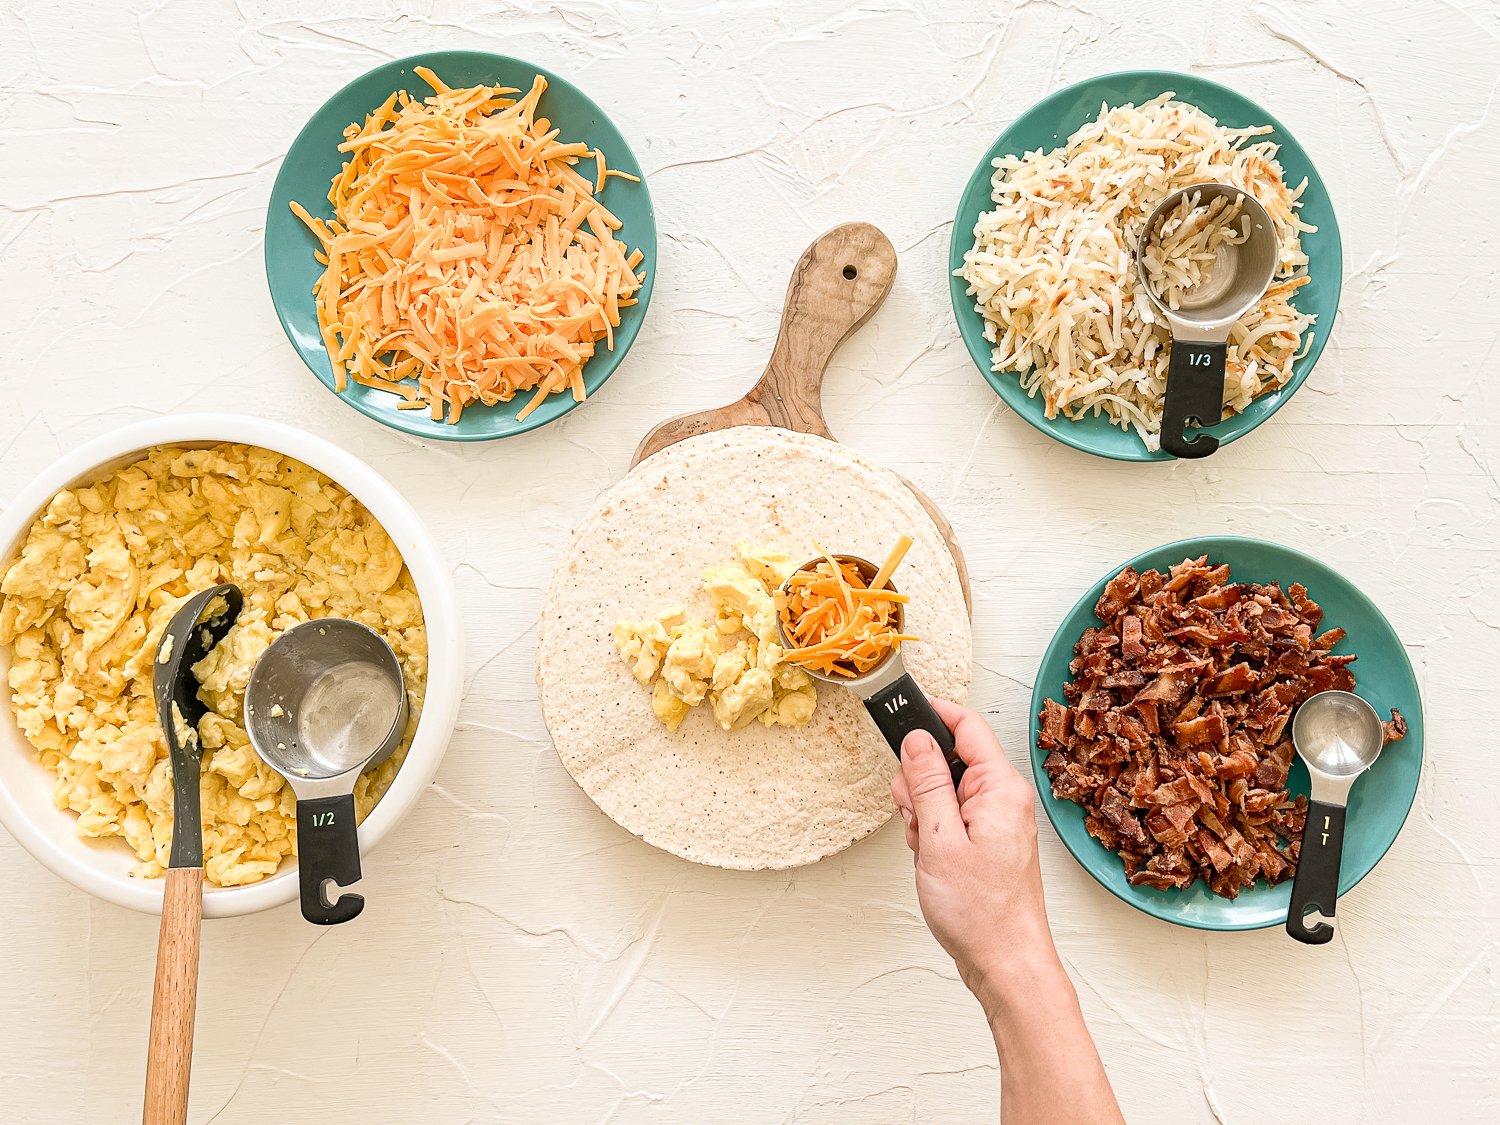 Breakfast burrito prep station with scrambled eggs, shredded cheddar cheese, shredded hash browns, chopped bacon, and tortillas with a hand putting a scoop of cheddar cheese on a tortilla.